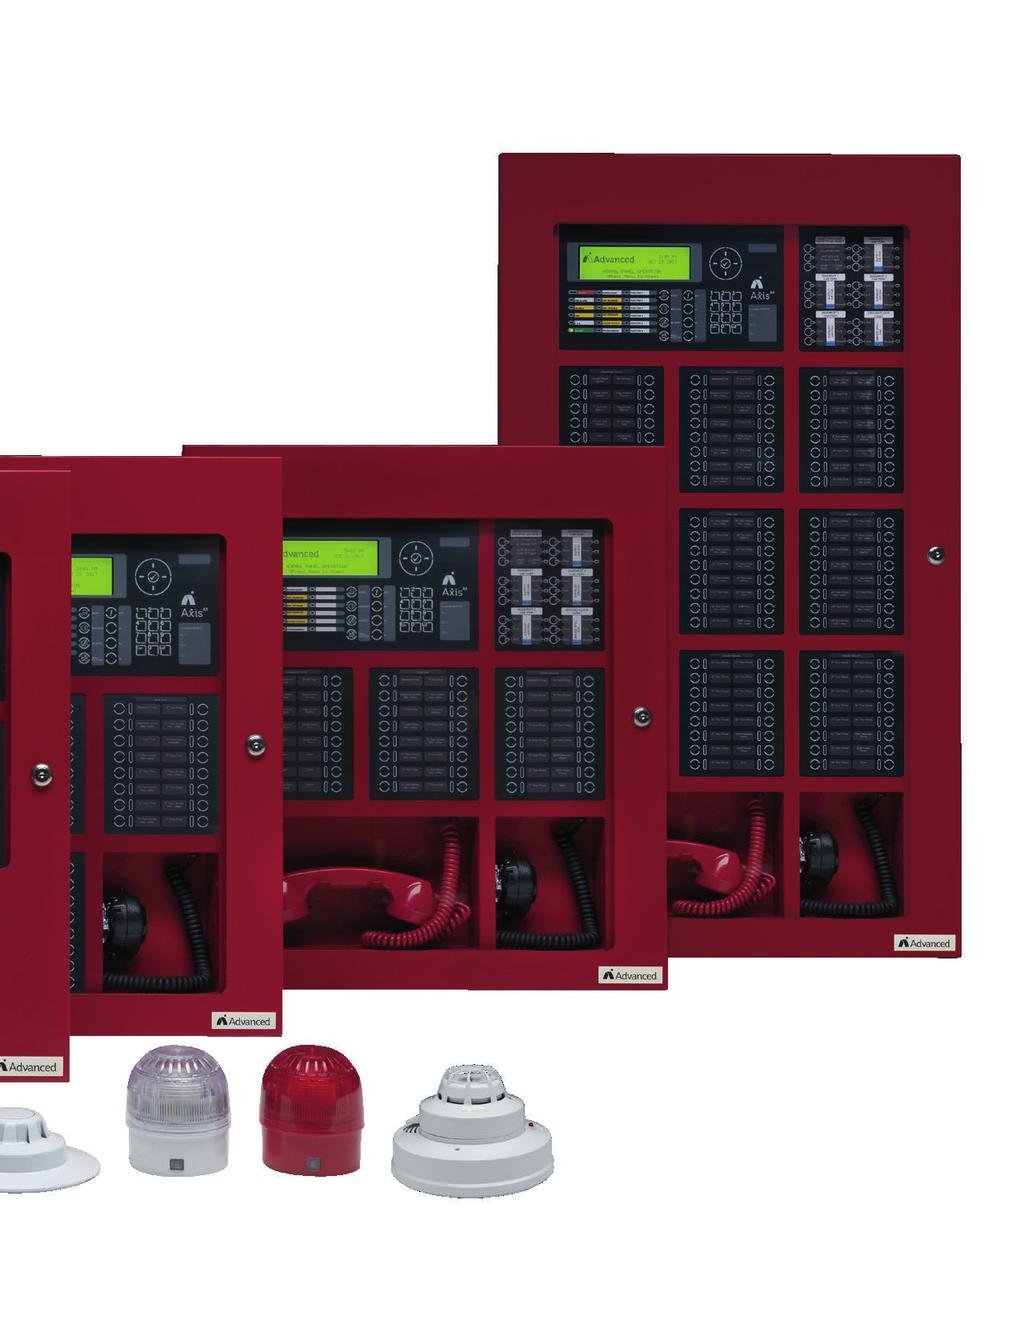 At its core are intelligent single and multi-loop networkable fire alarm control panels